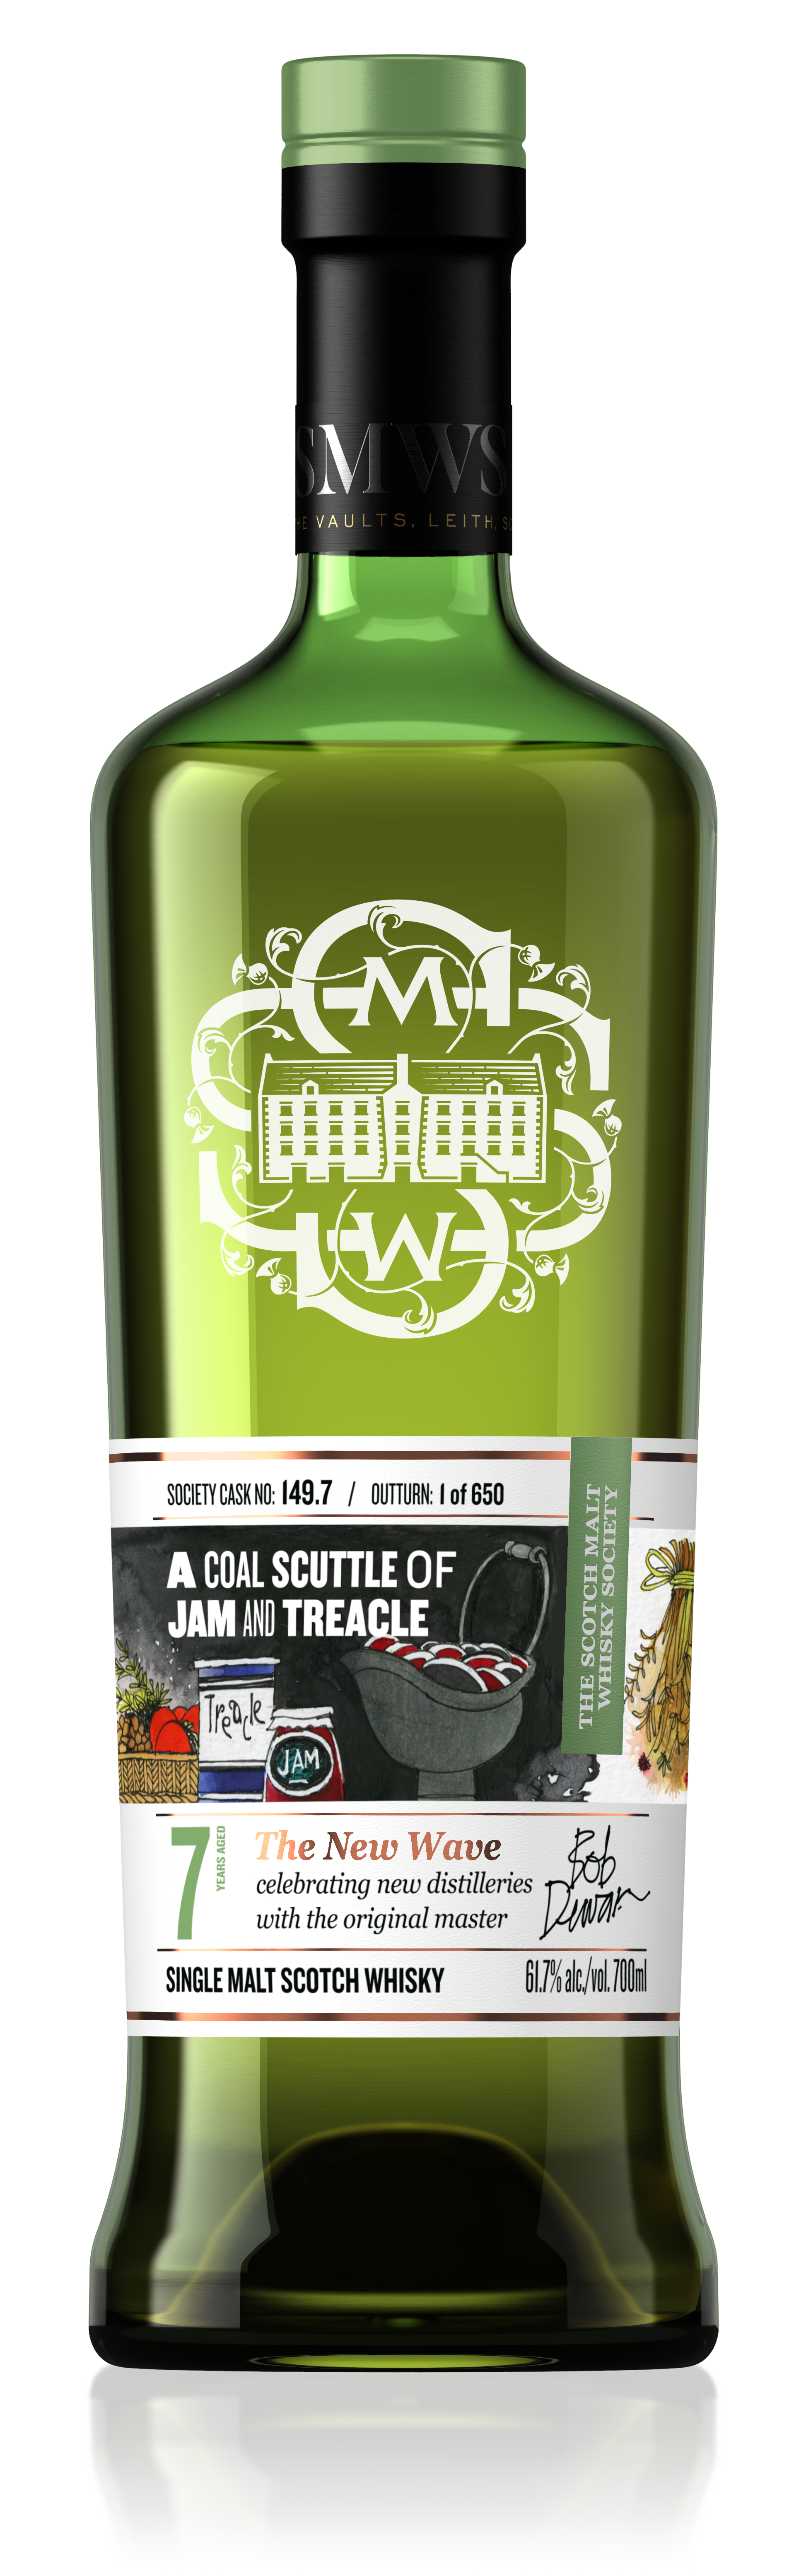 SMWS 149.7 - A Coal Scuttle OF Jam And Treacle